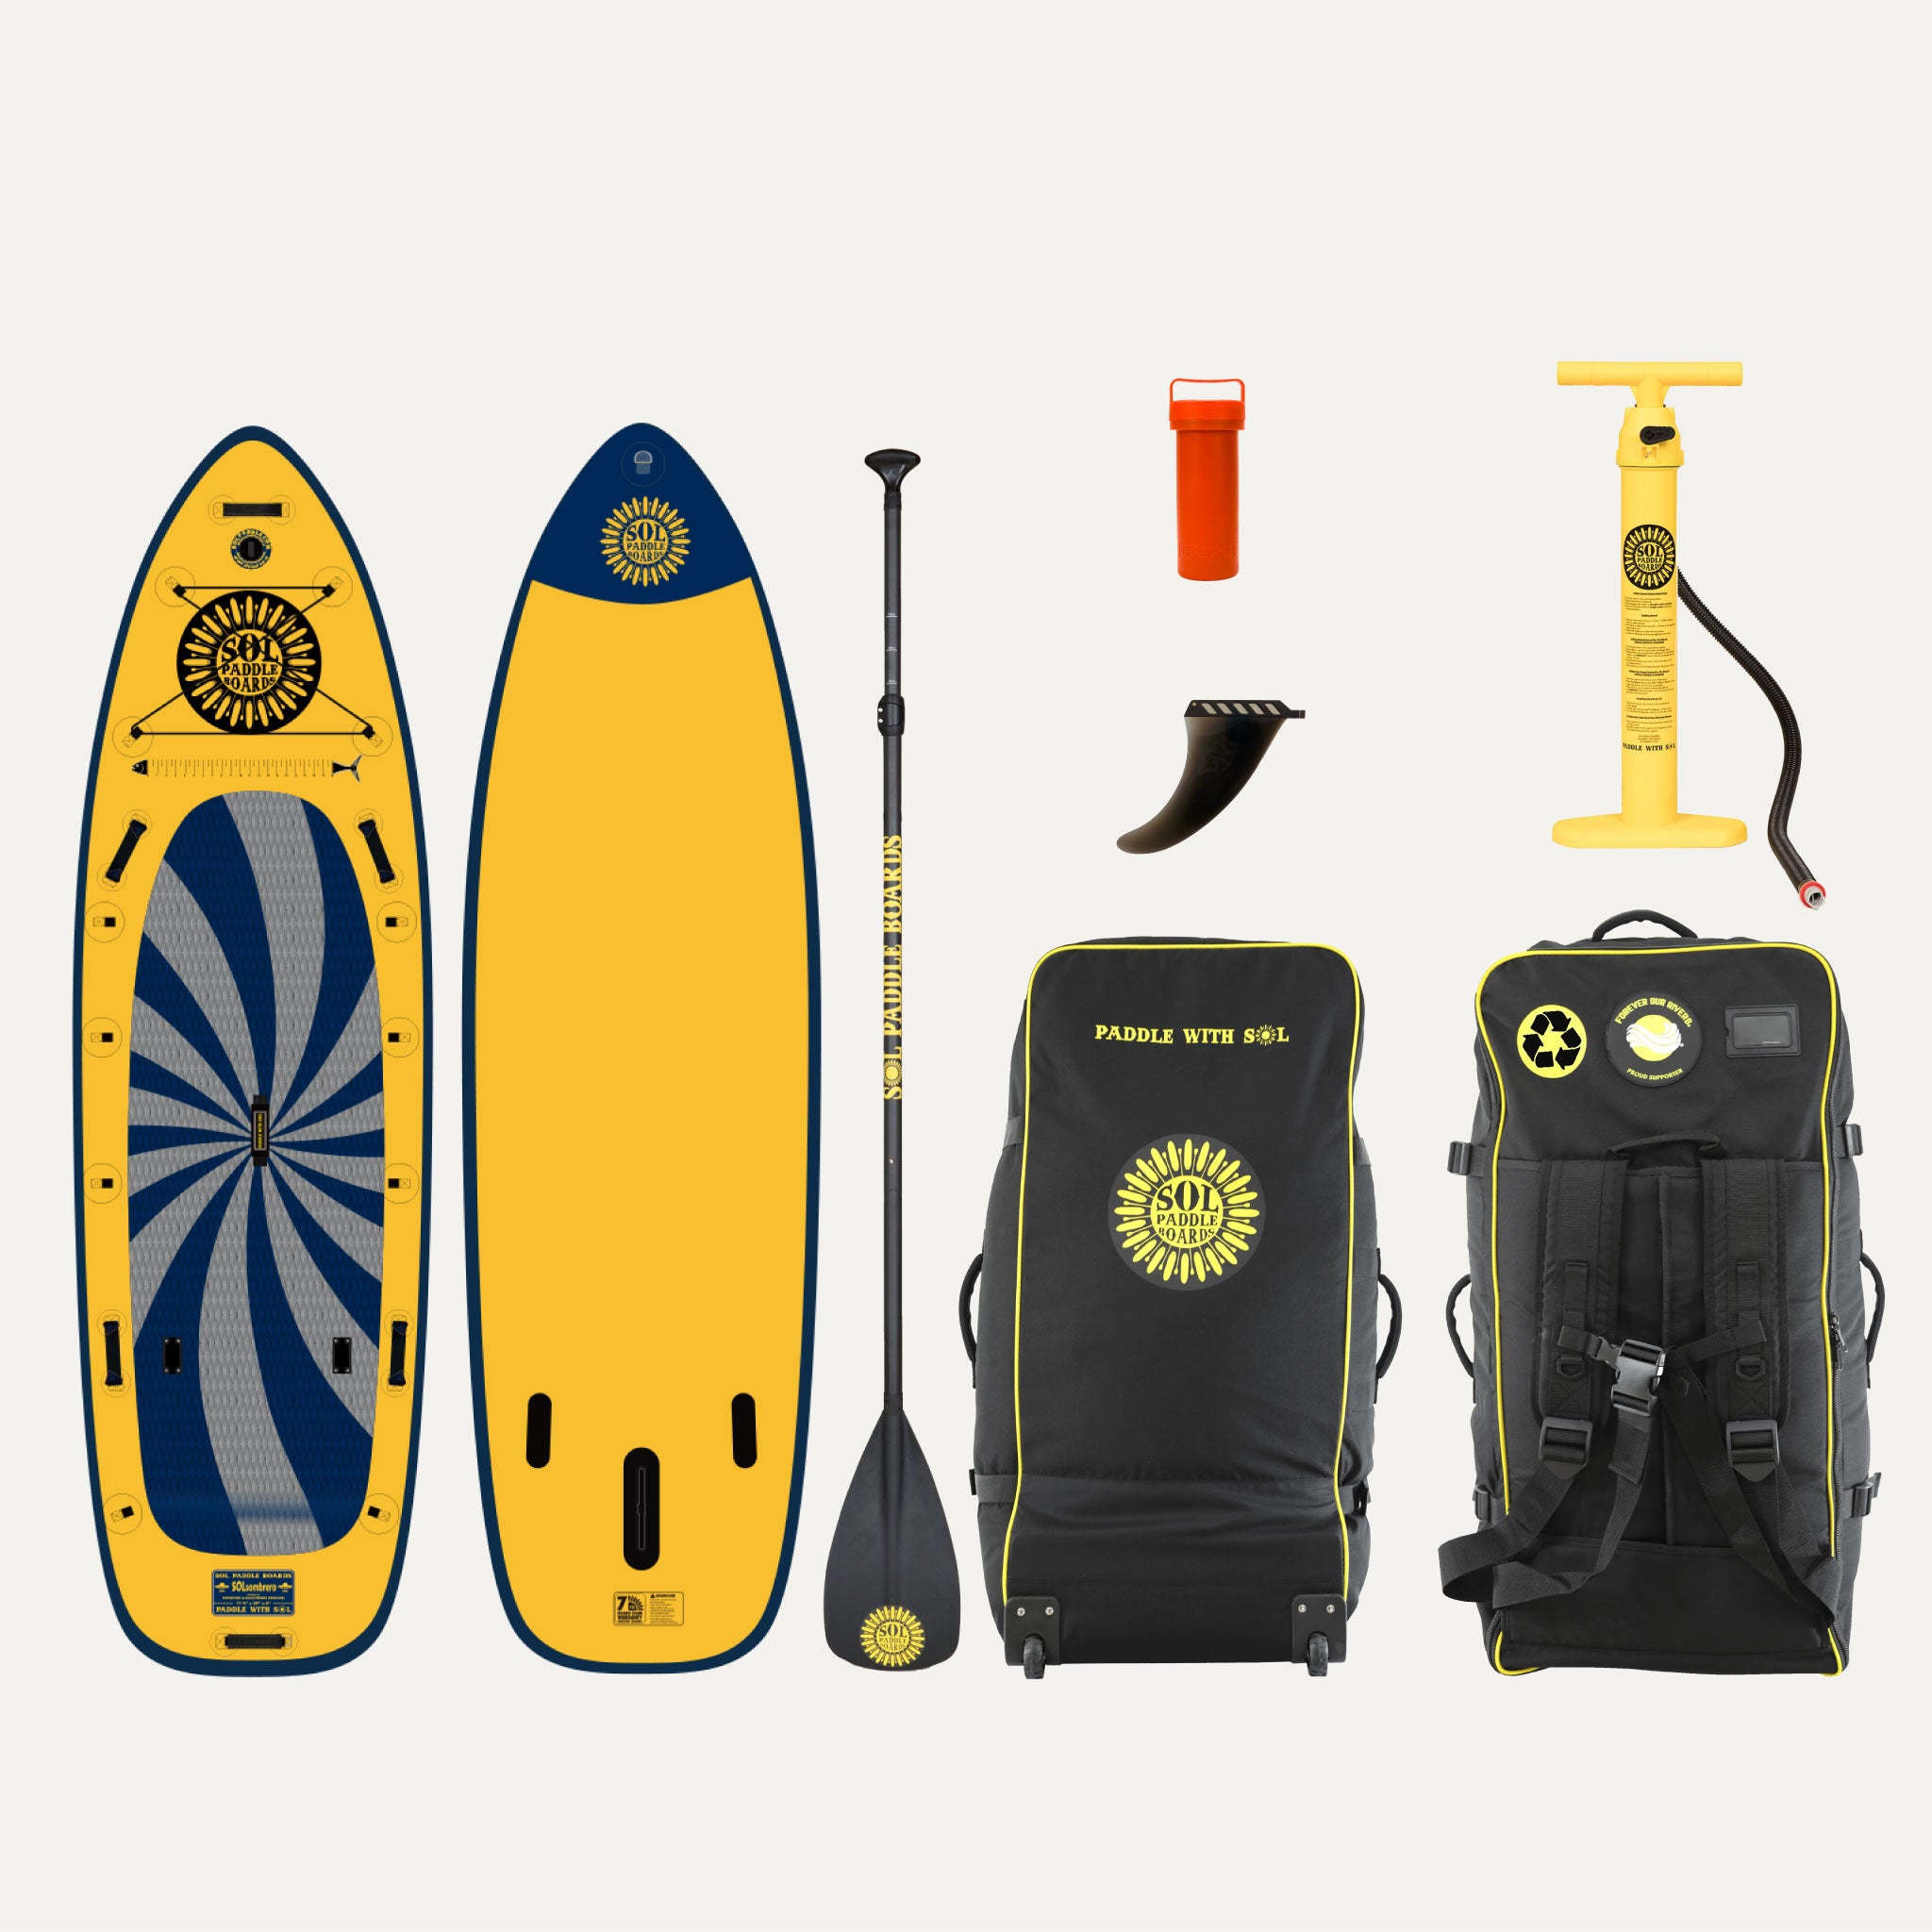 Infinity SOLsombrero Inflatable Paddle Board showcasing the top and bottom views of the SUP board and the accessories that come with it